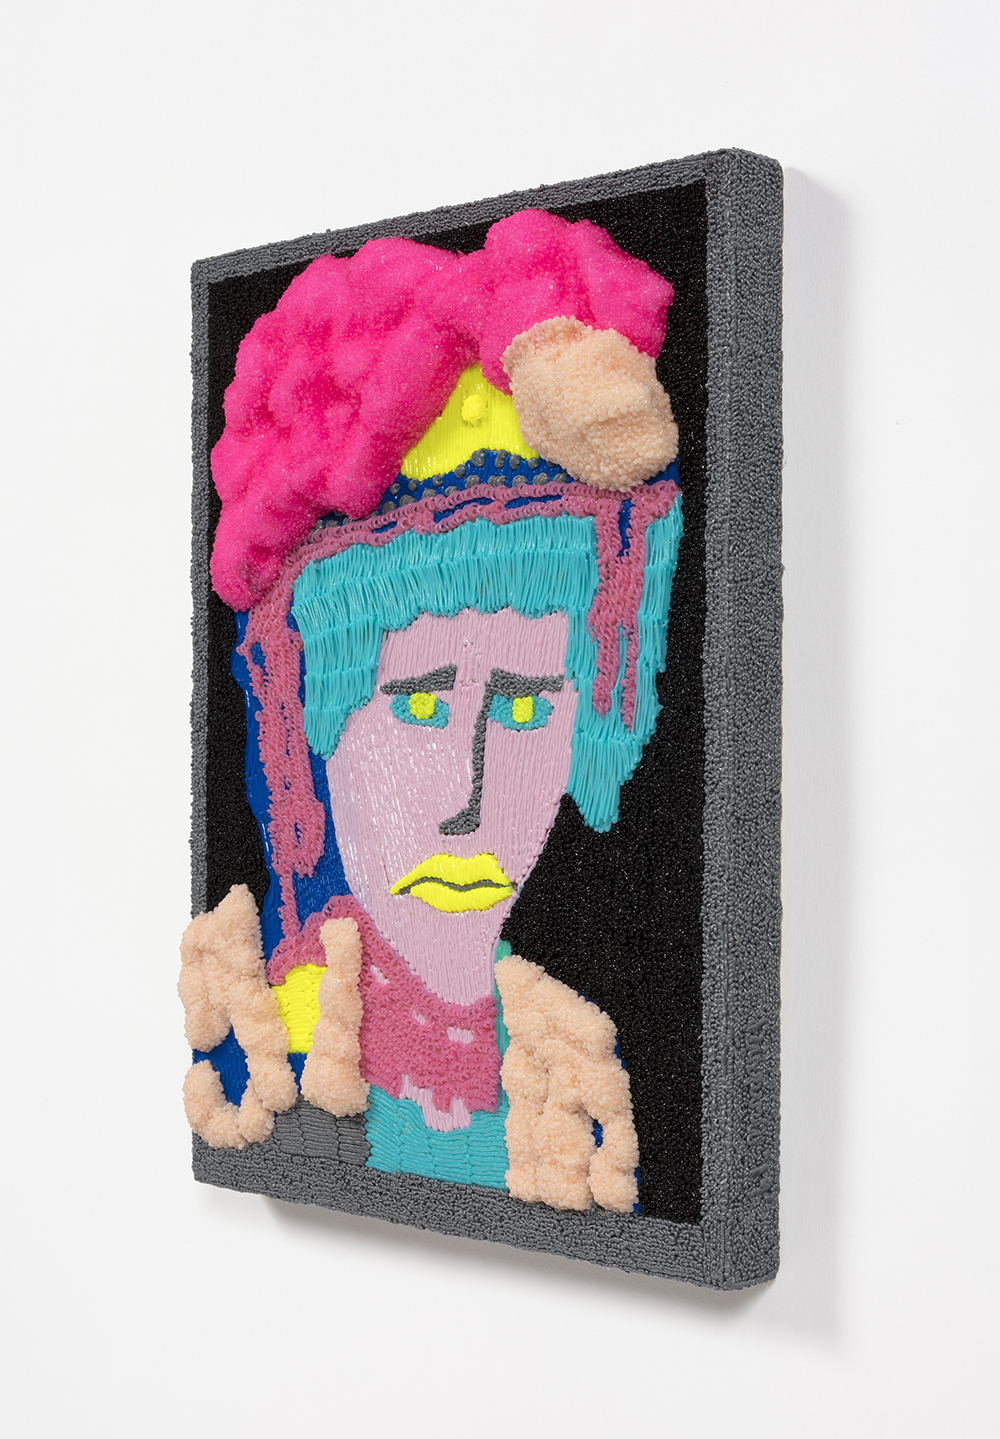 Dominic Dispirito. <em>Pouty pearly</em>, 2018. Manually printed PLA plastic on board, 11 3/4 x 8 1/4 inches  (30 x 21 cm)